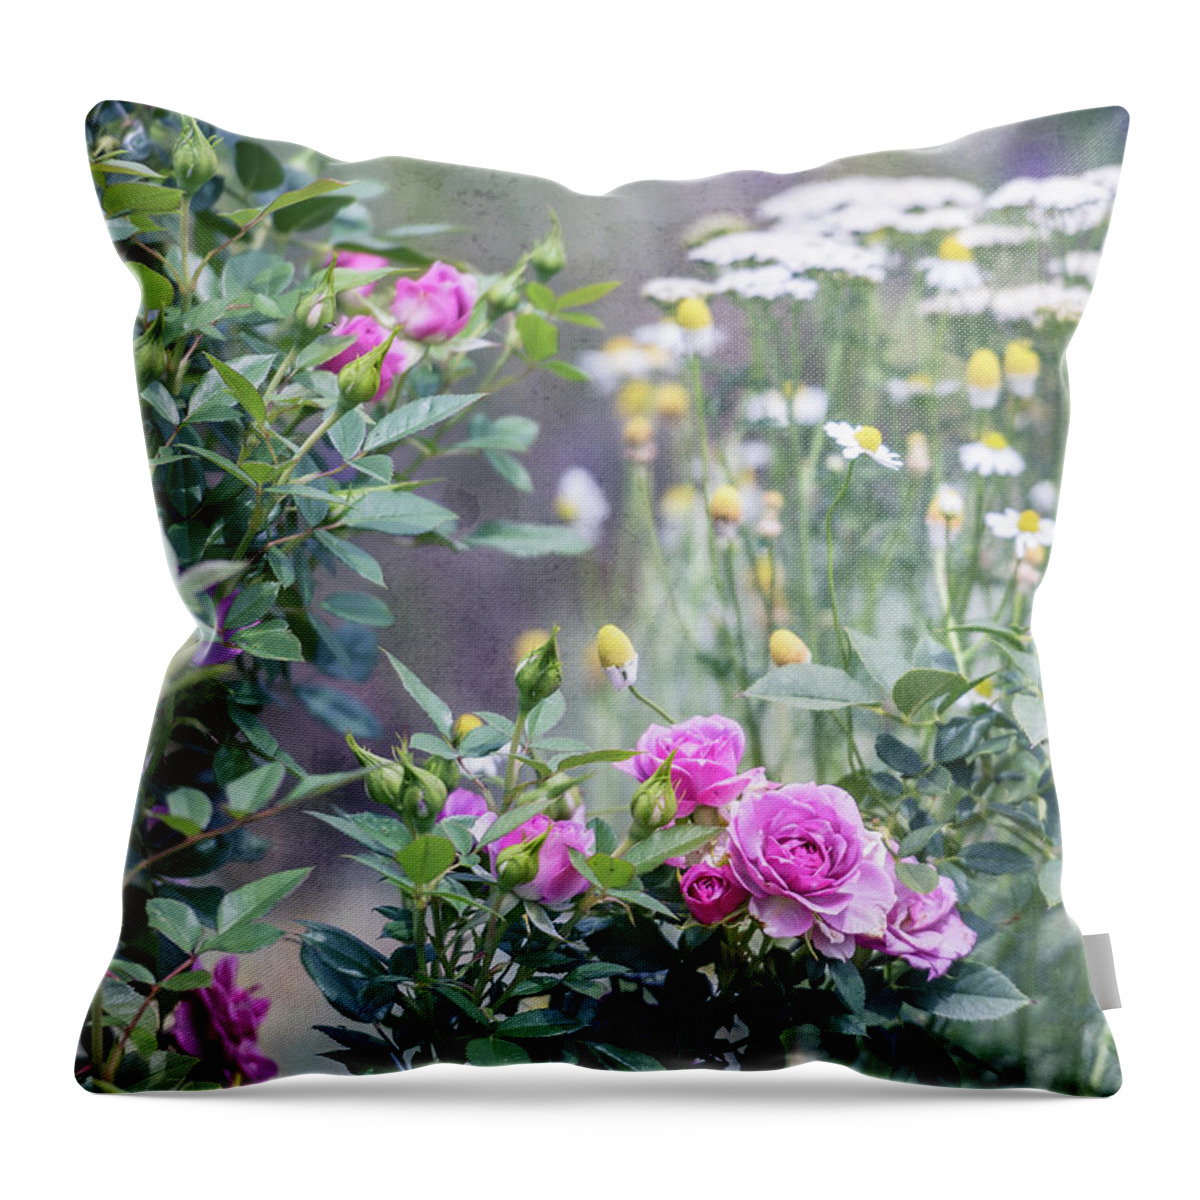 Roses Throw Pillow featuring the photograph English Garden by Jennifer Grossnickle